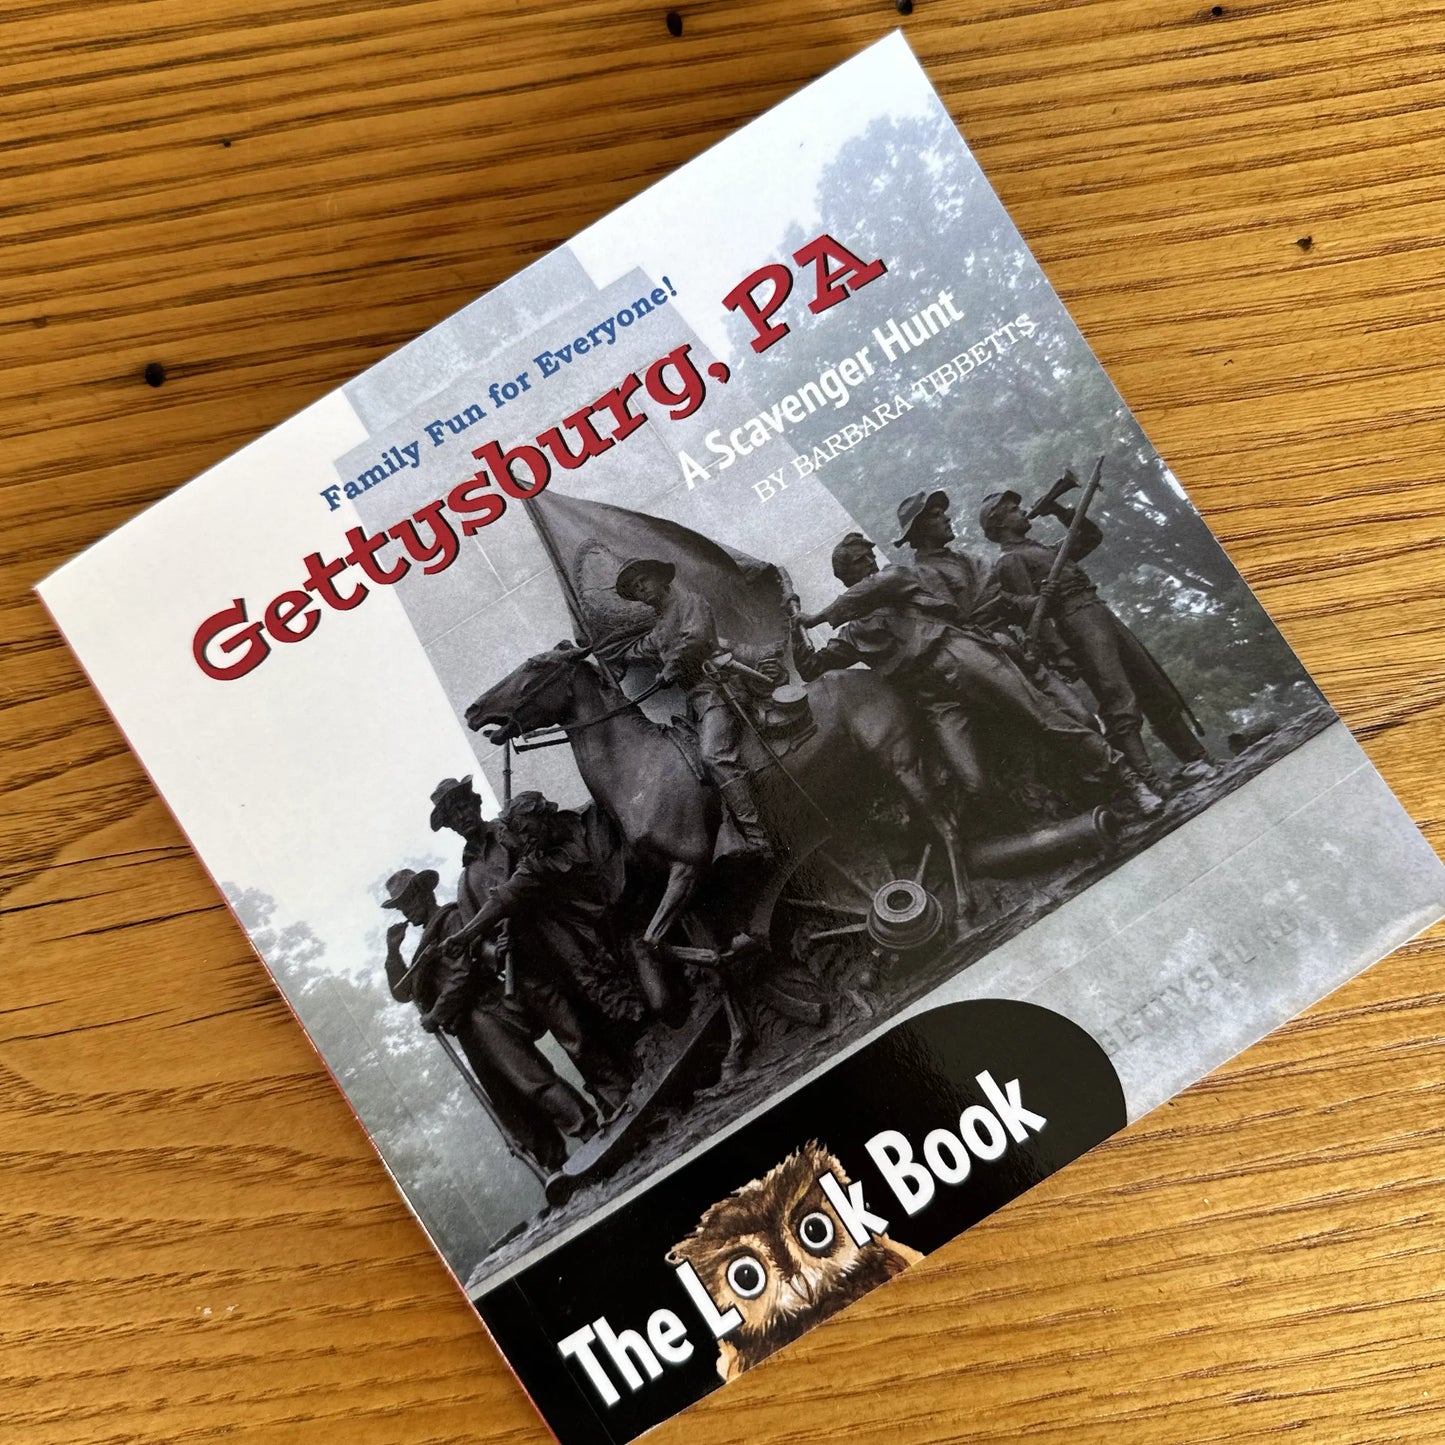 The LOOK Book "Gettysburg, PA: A Scavenger Hunt" by Barbara Tibbetts